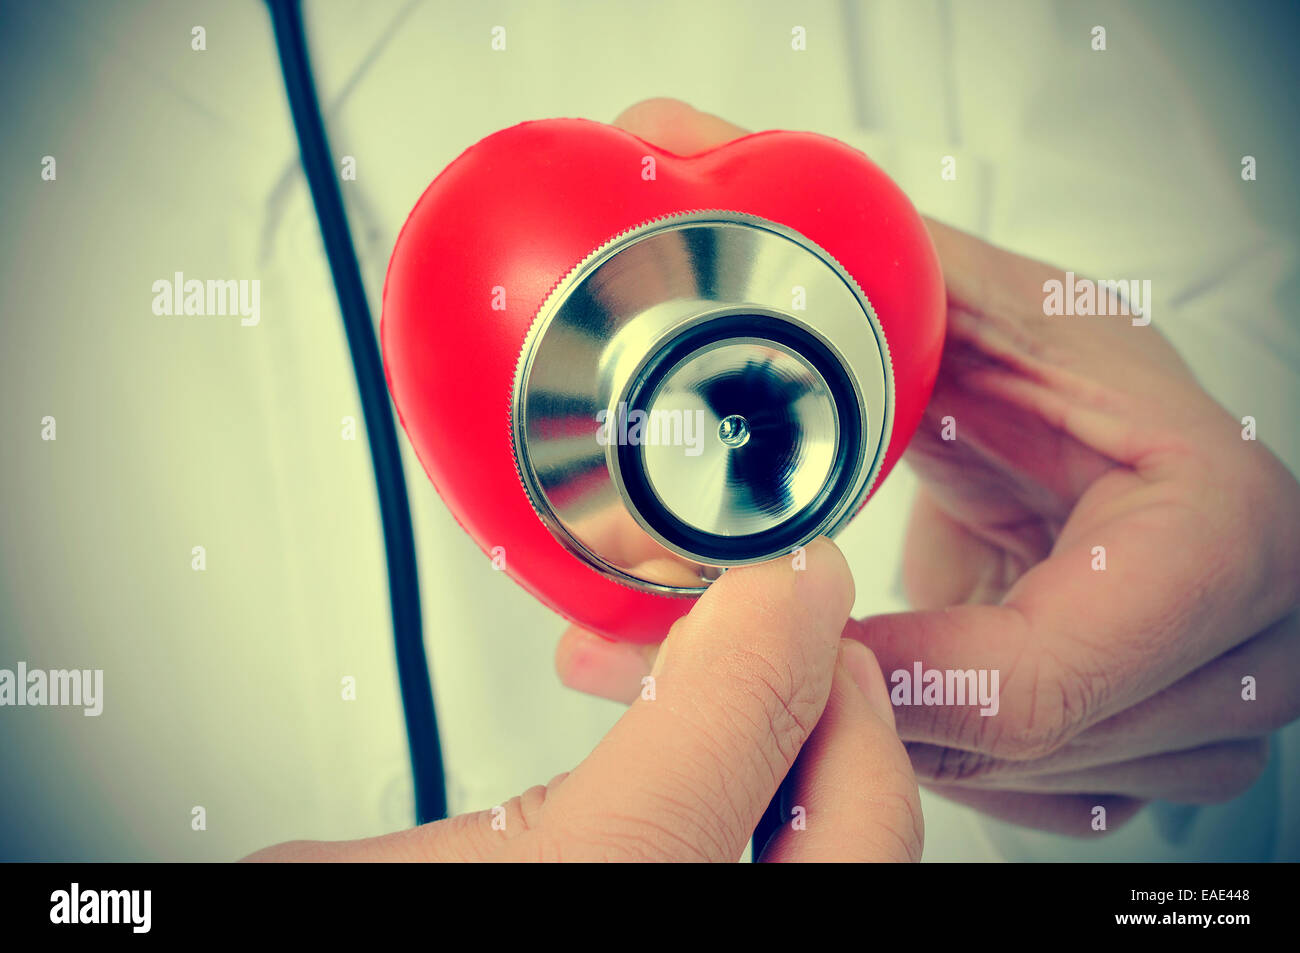 a doctor auscultating a red heart with a stethoscope, with a retro effect Stock Photo